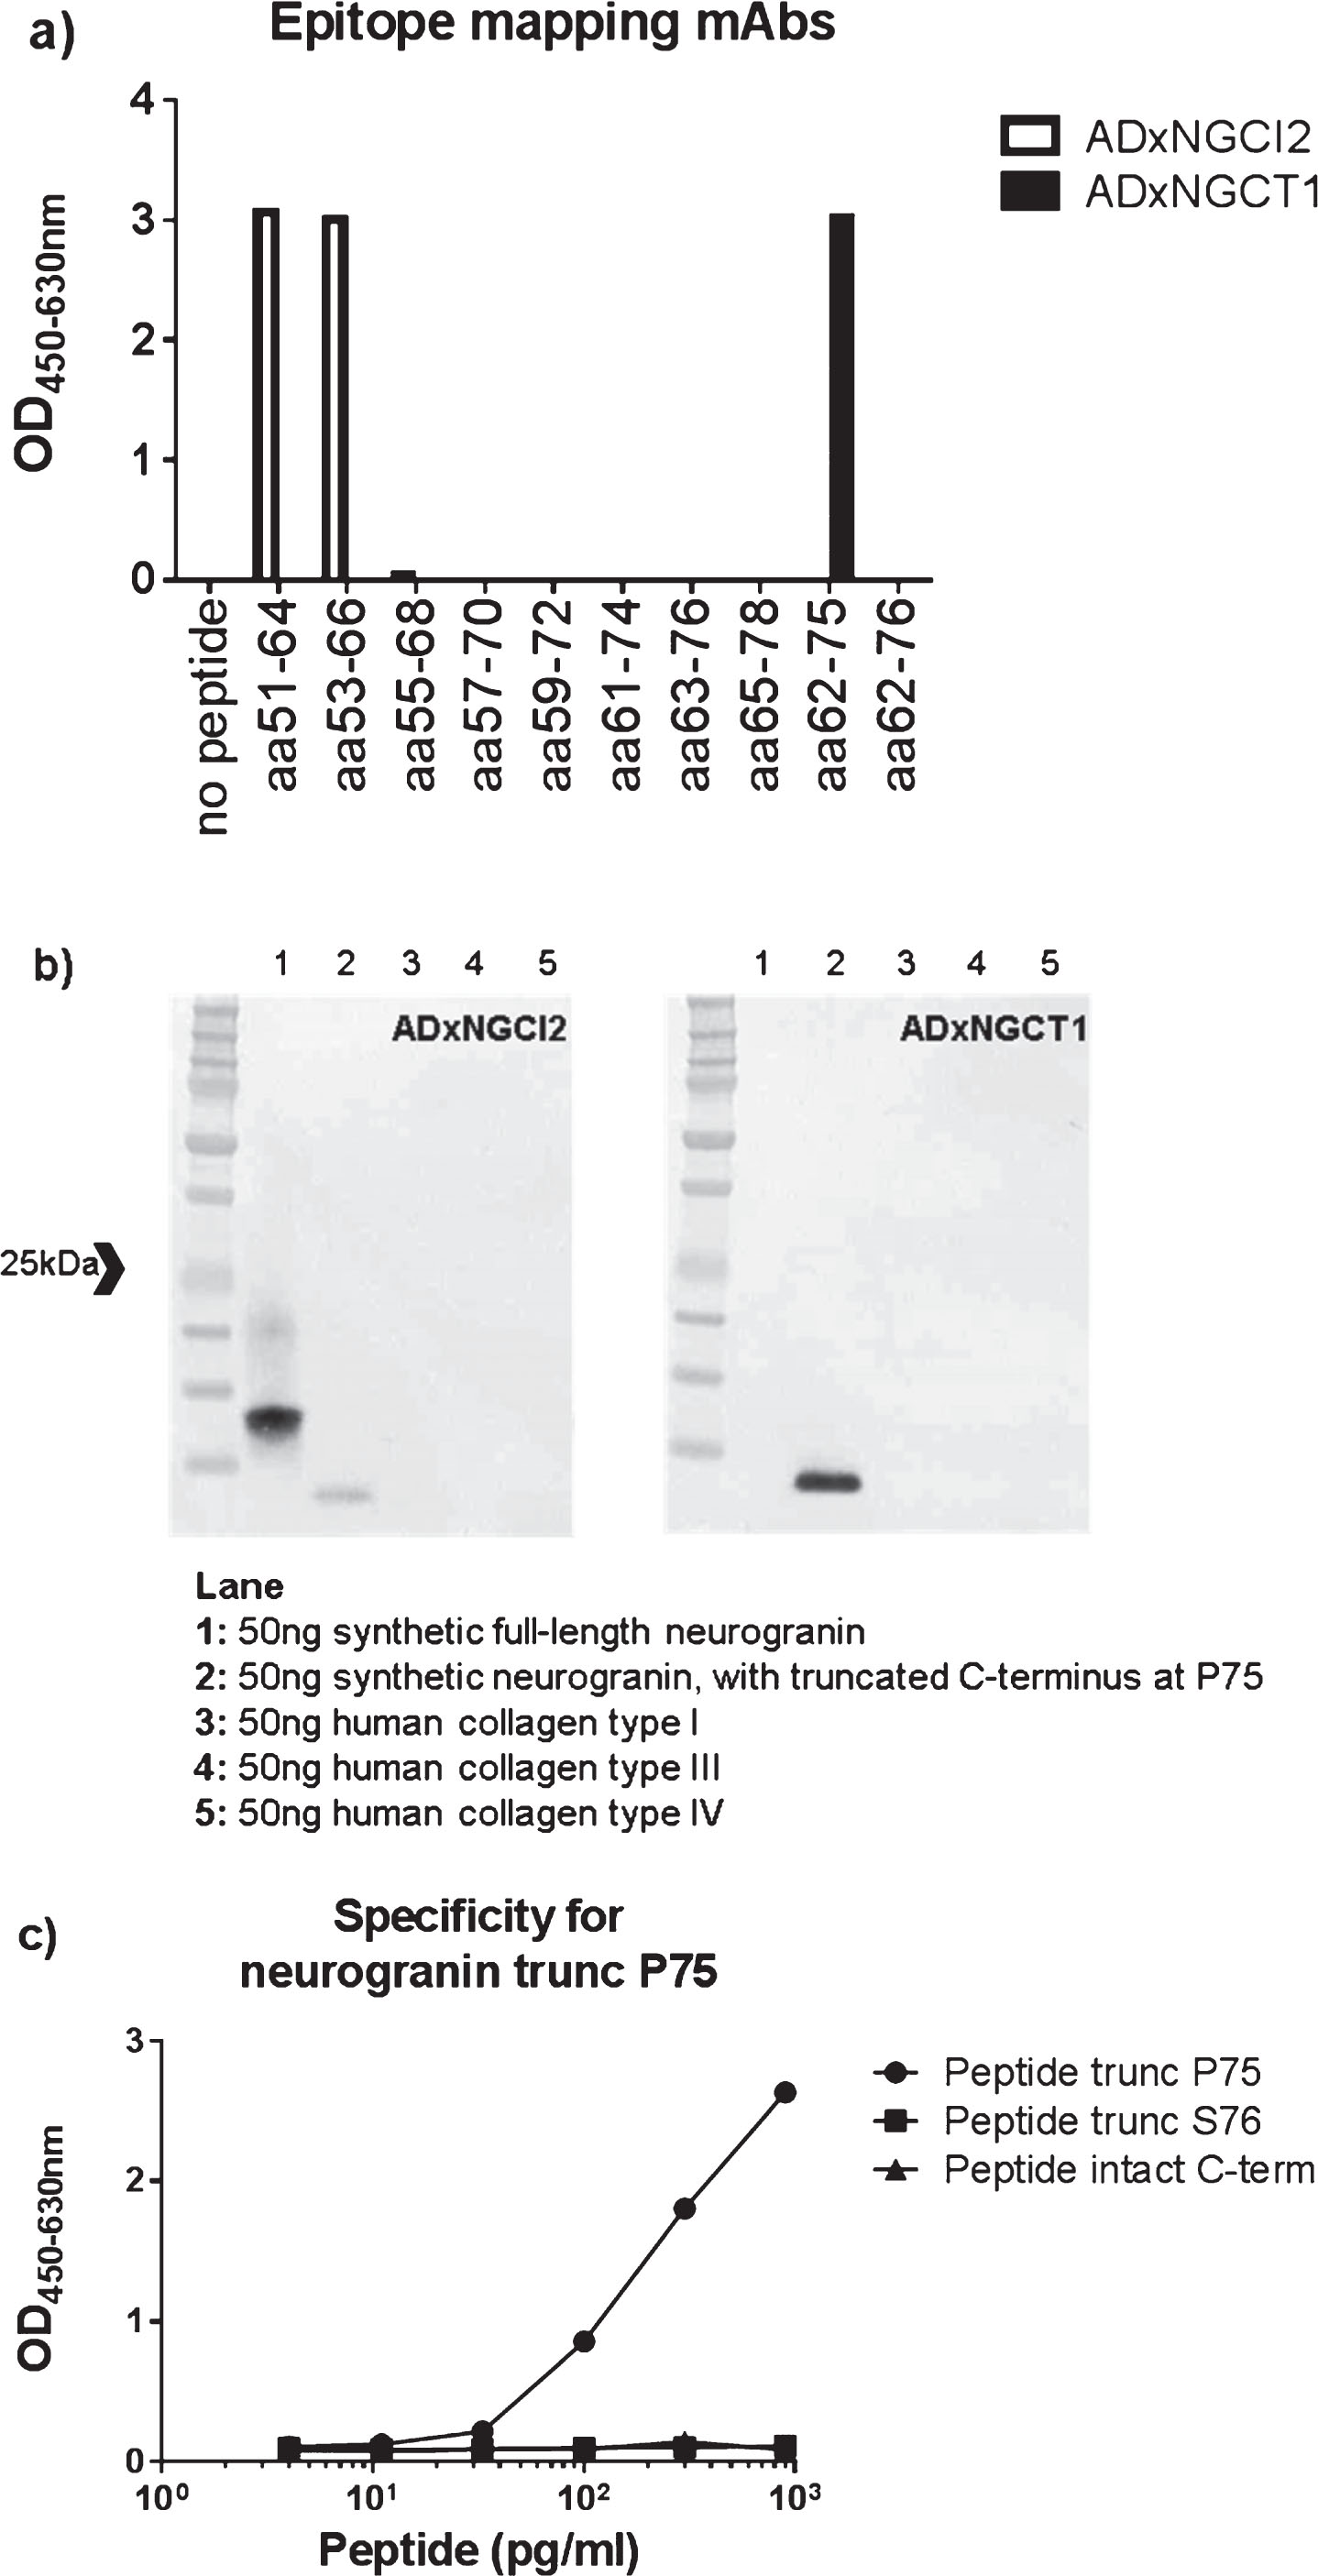 a) Epitope mapping of both mAbs ADxNGCI2 and ADxNGCT1 was performed with overlapping synthetic peptides, ranging from R51 to D78. b) Specificity of the mAbs ADxNGCI2 and ADxNGCT1 was evaluated by western blot analysis where both synthetic full-length neurogranin, as well as a synthetic neurogranin peptide that is truncated at P75, were included in the gel electrophoresis, next to human collagen type I, III, and IV. ADxNGCI2 positively stained both synthetic peptides, whereas ADxNGCT1 only labeled the truncated form. None of the mAbs detected the collagen proteins. c) To confirm the specificity of the prototype ELISA towards neurogranin species truncated at P75, different concentrations were analyzed of several synthetic neurogranin peptides that differ in their C-terminus, i.e., intact (Peptide intact C-term) or either truncated at P75 (Peptide trunc P75) or at S76 (Peptide trunc S76).